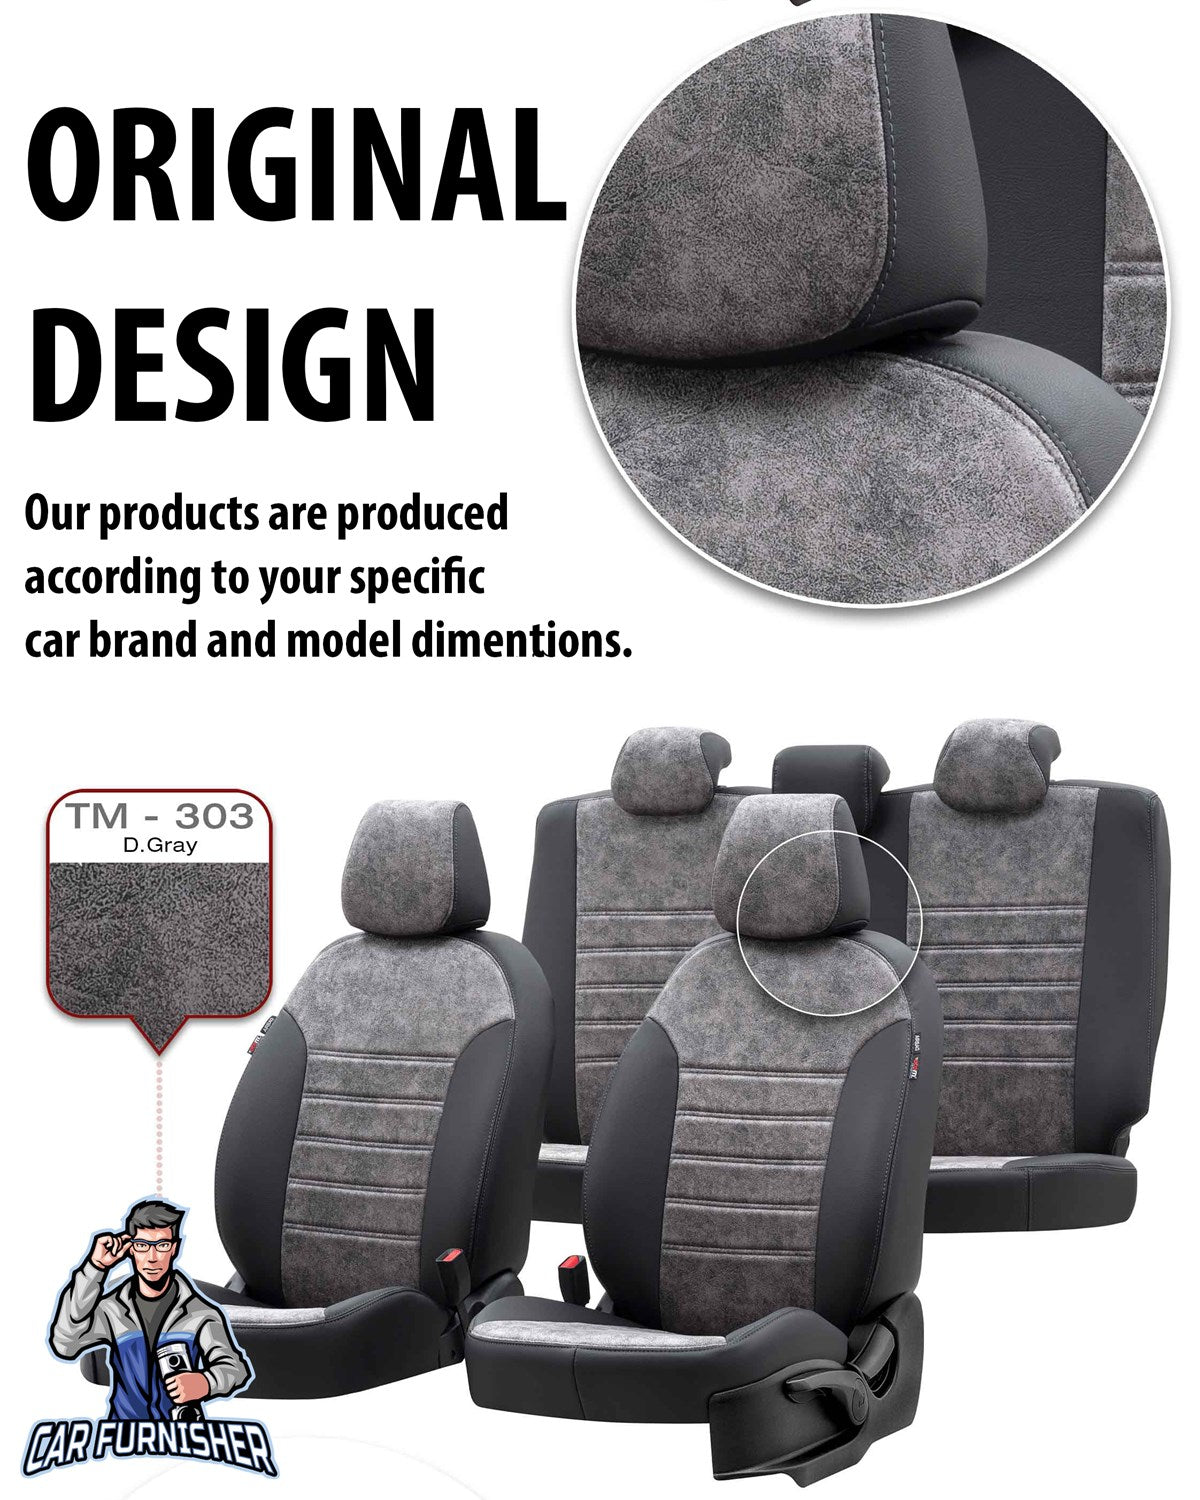 Volkswagen Caddy Seat Cover Milano Suede Design Ivory Leather & Suede Fabric